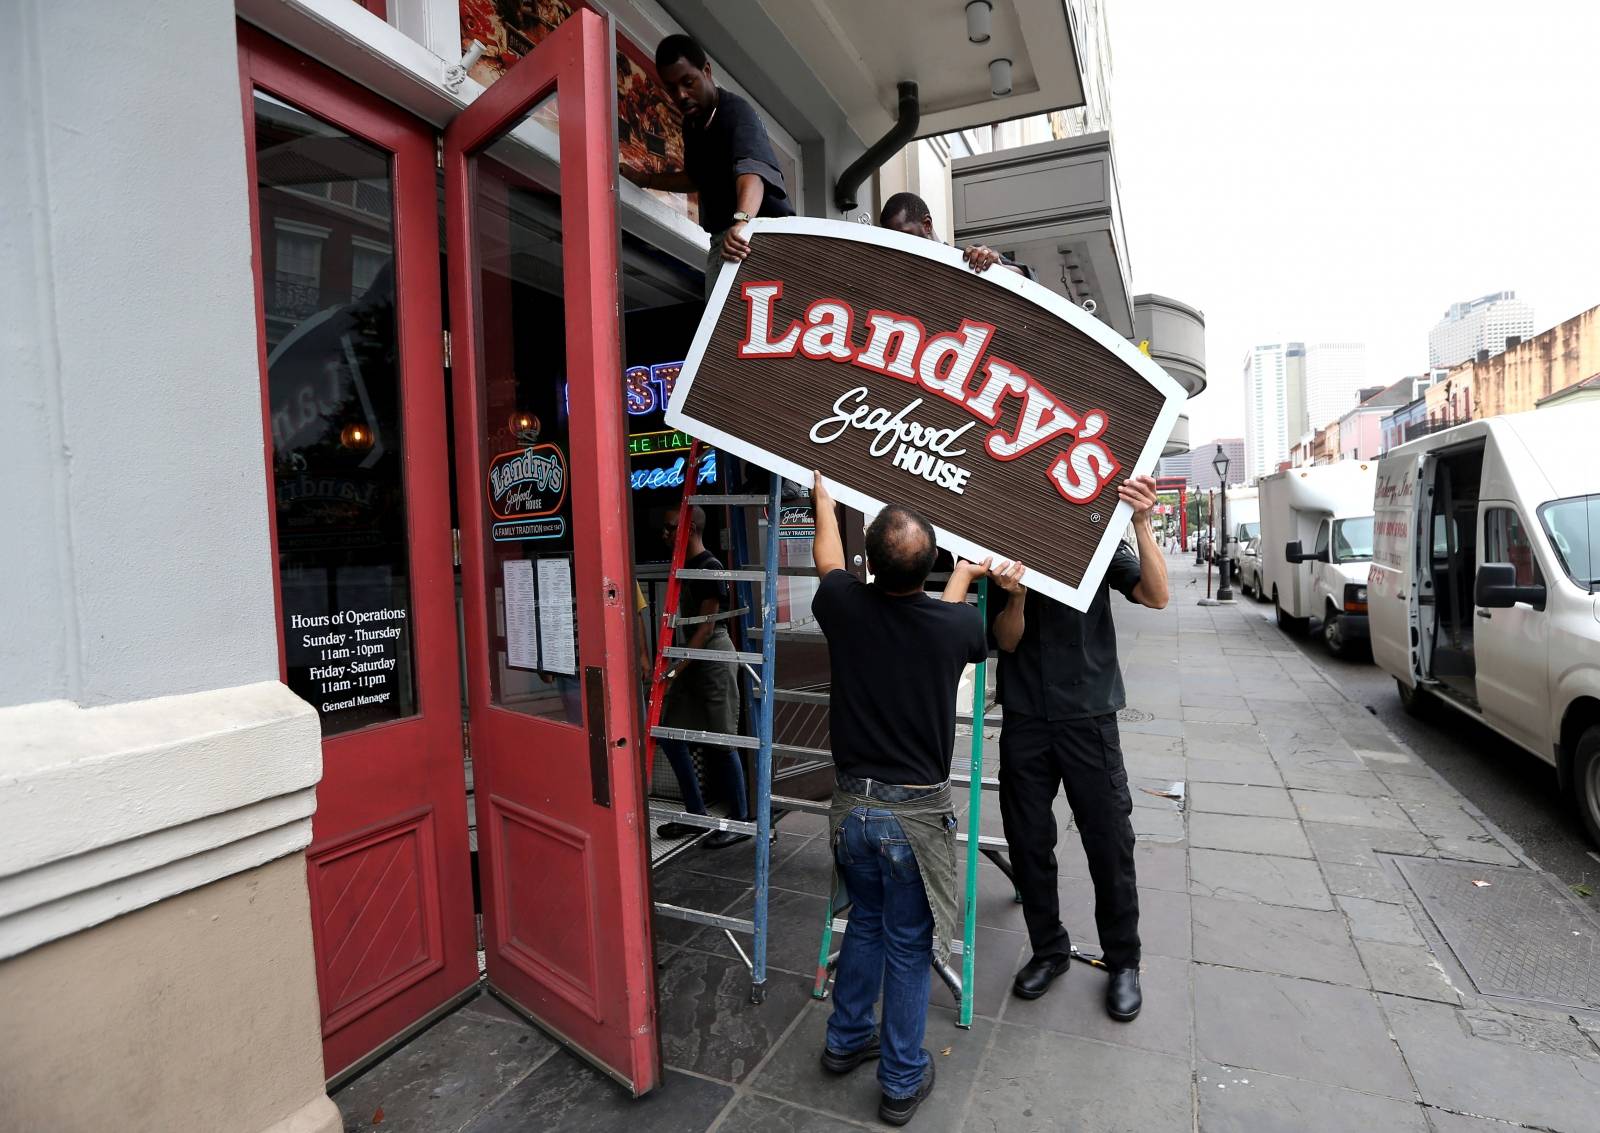 Employees remove a sign in the French Quarter as Tropical Storm Barry approaches land in New Orleans